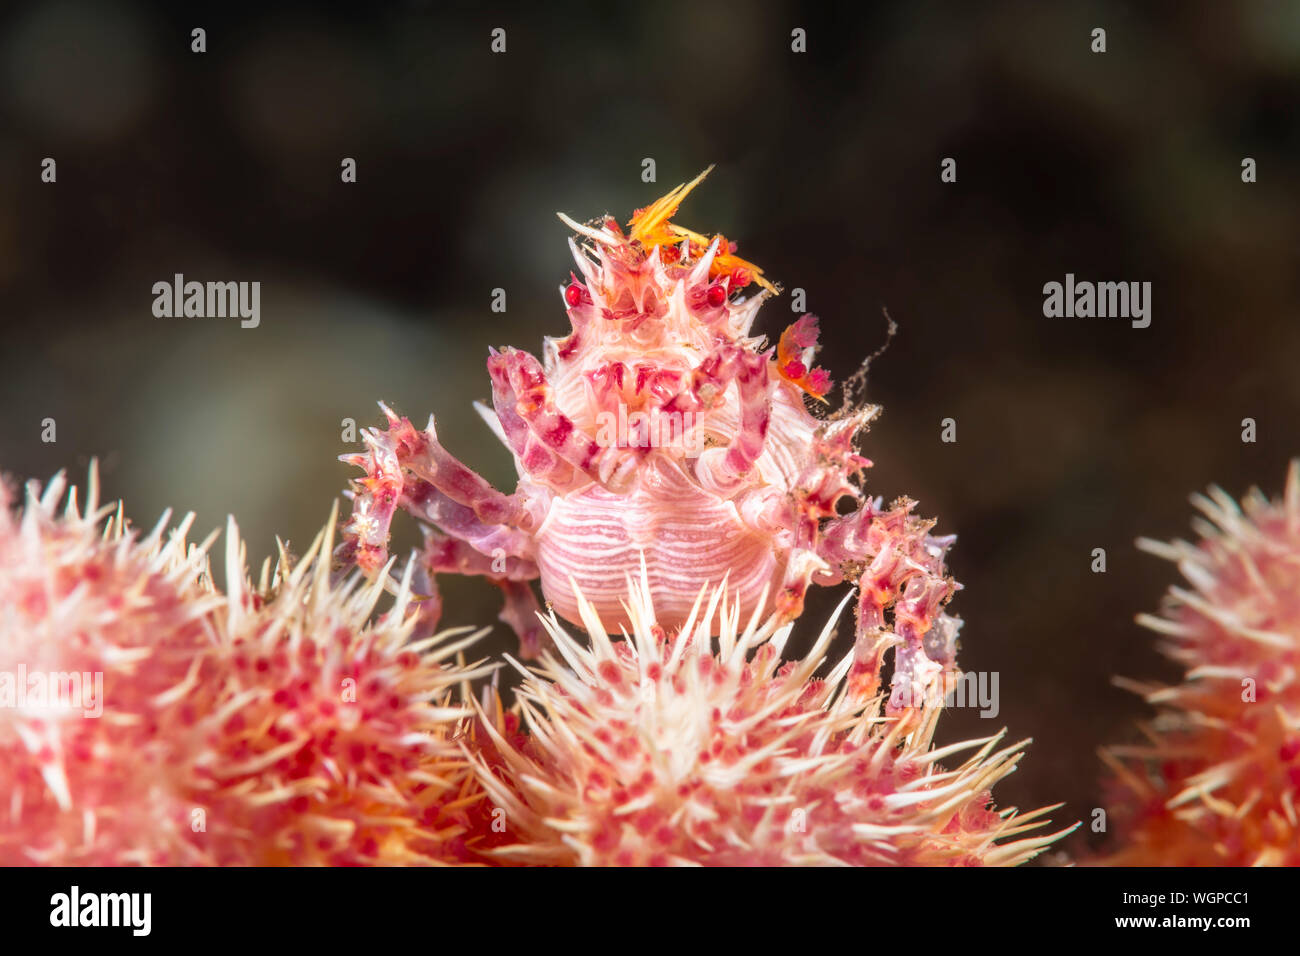 A red and white coral crab rests atop a piece of coral of the same color, which it uses to blend in to avoid predation. Stock Photo